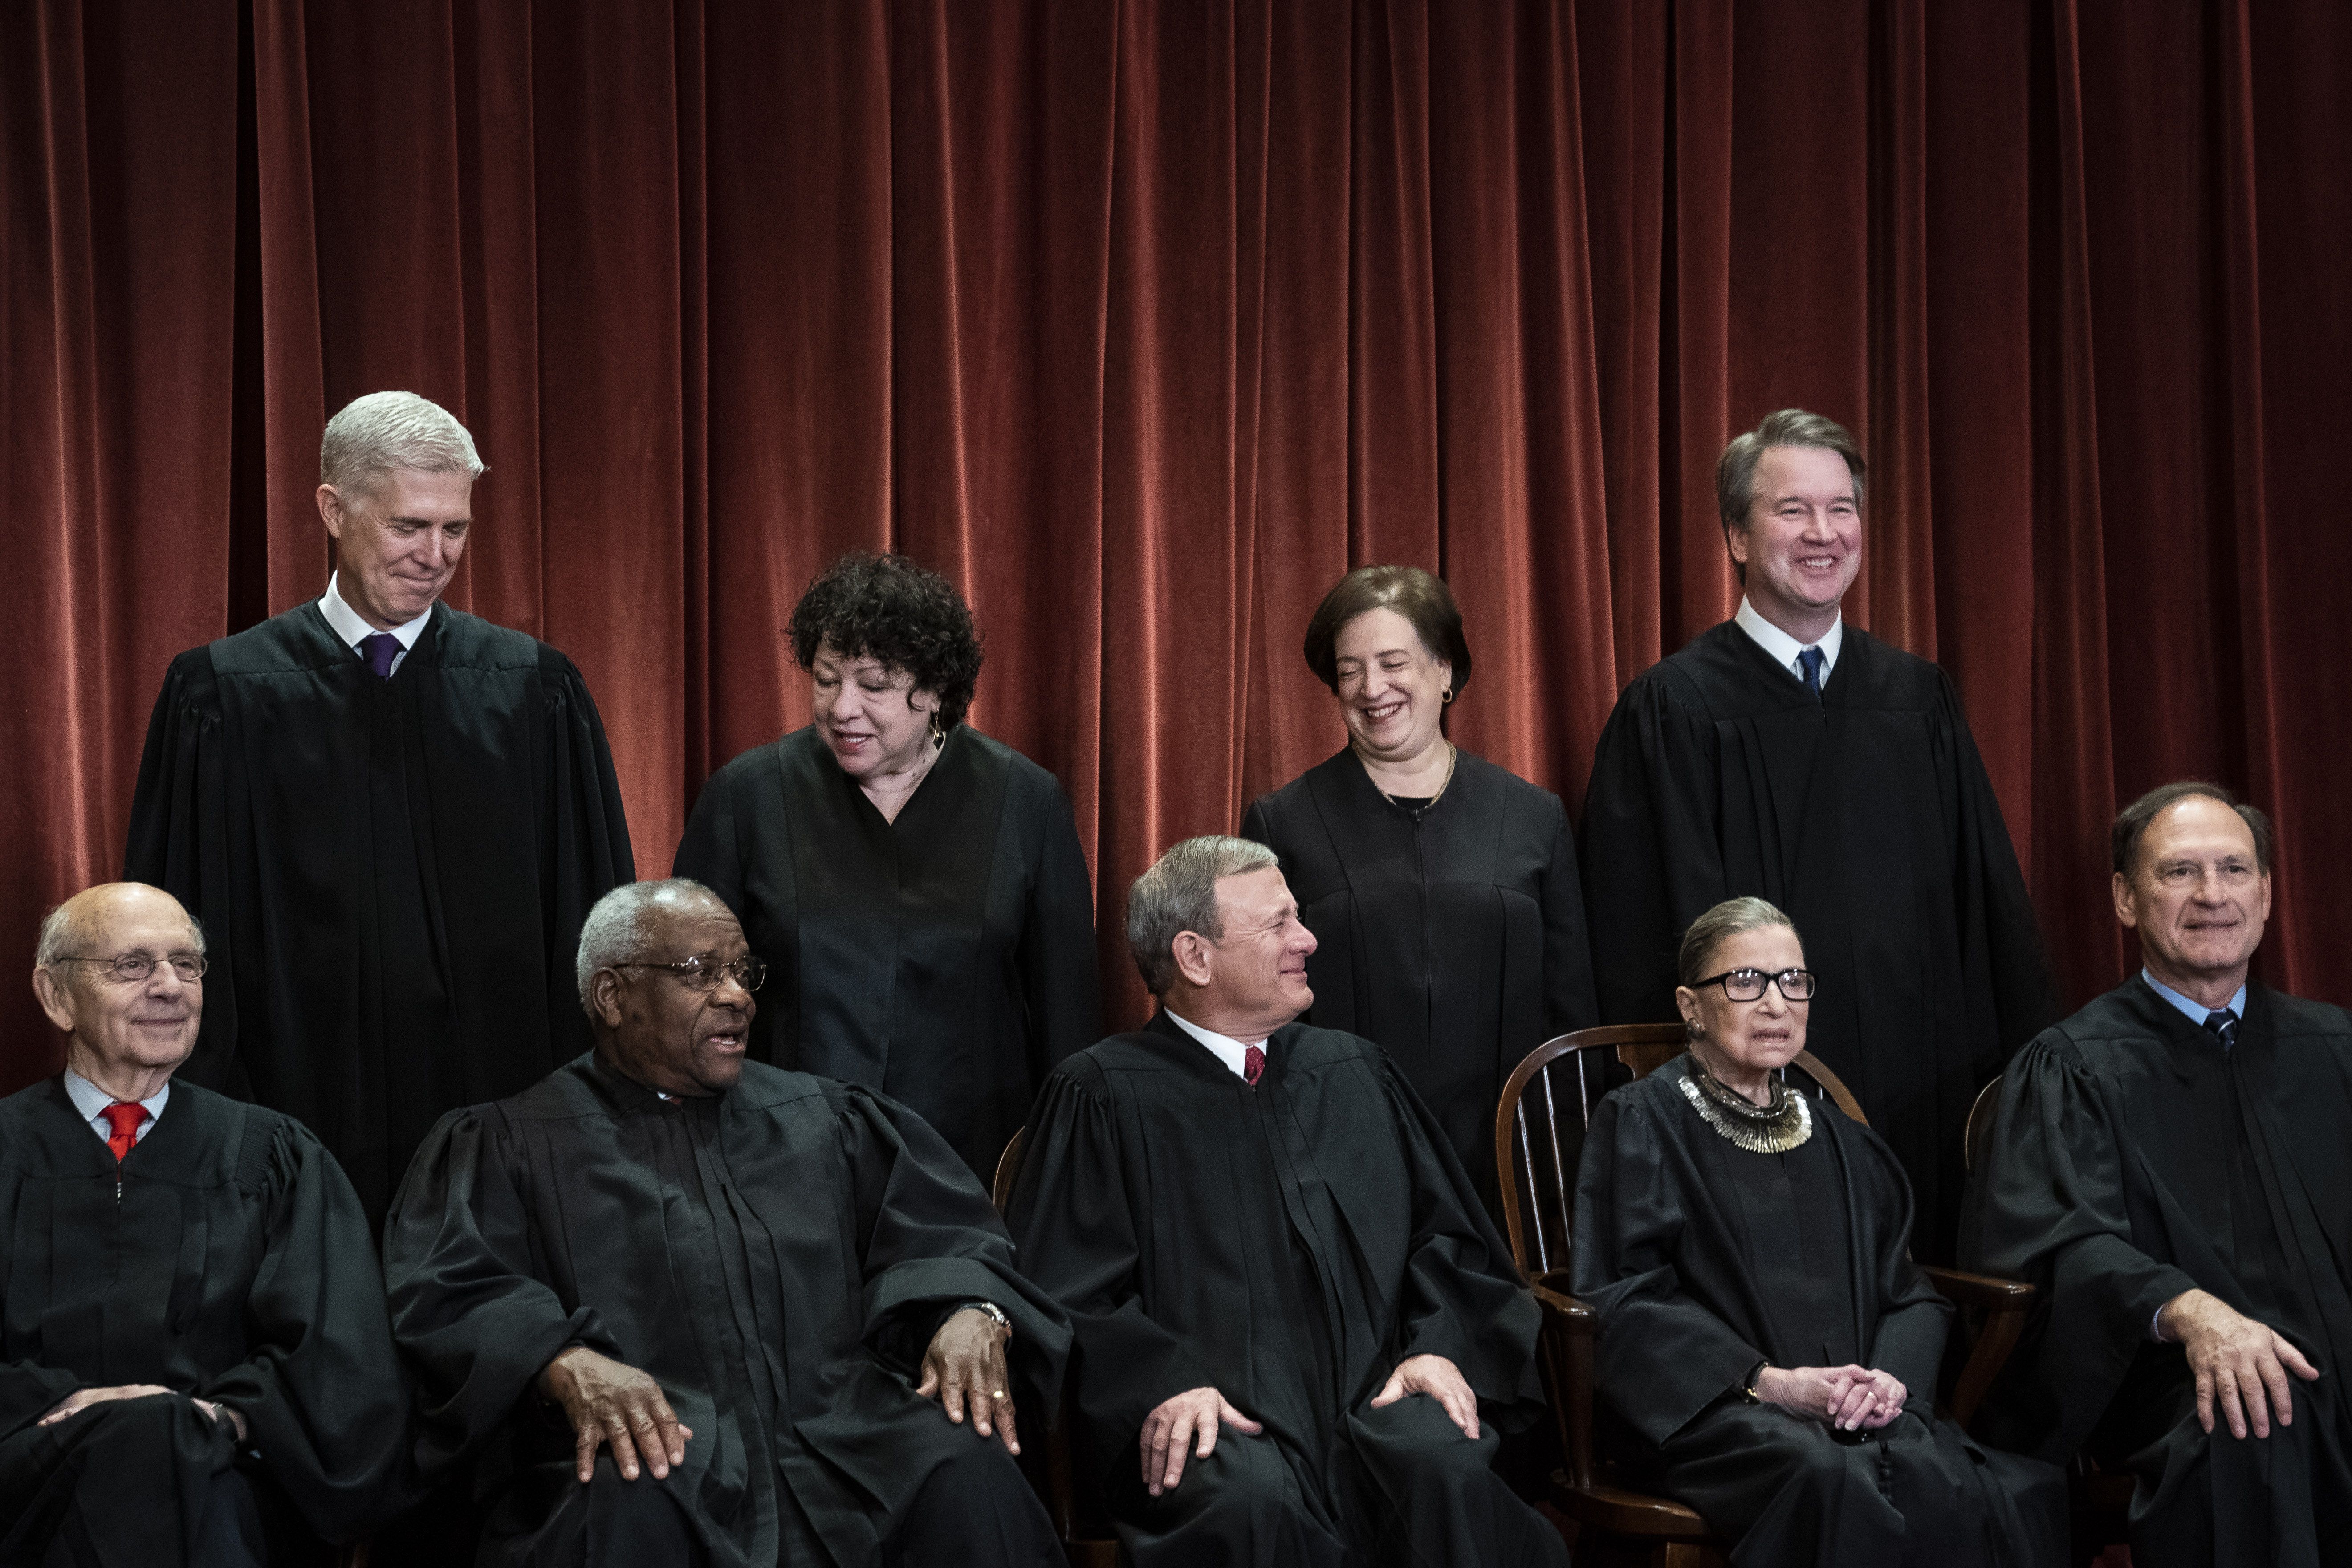 rbg with other scotus judges